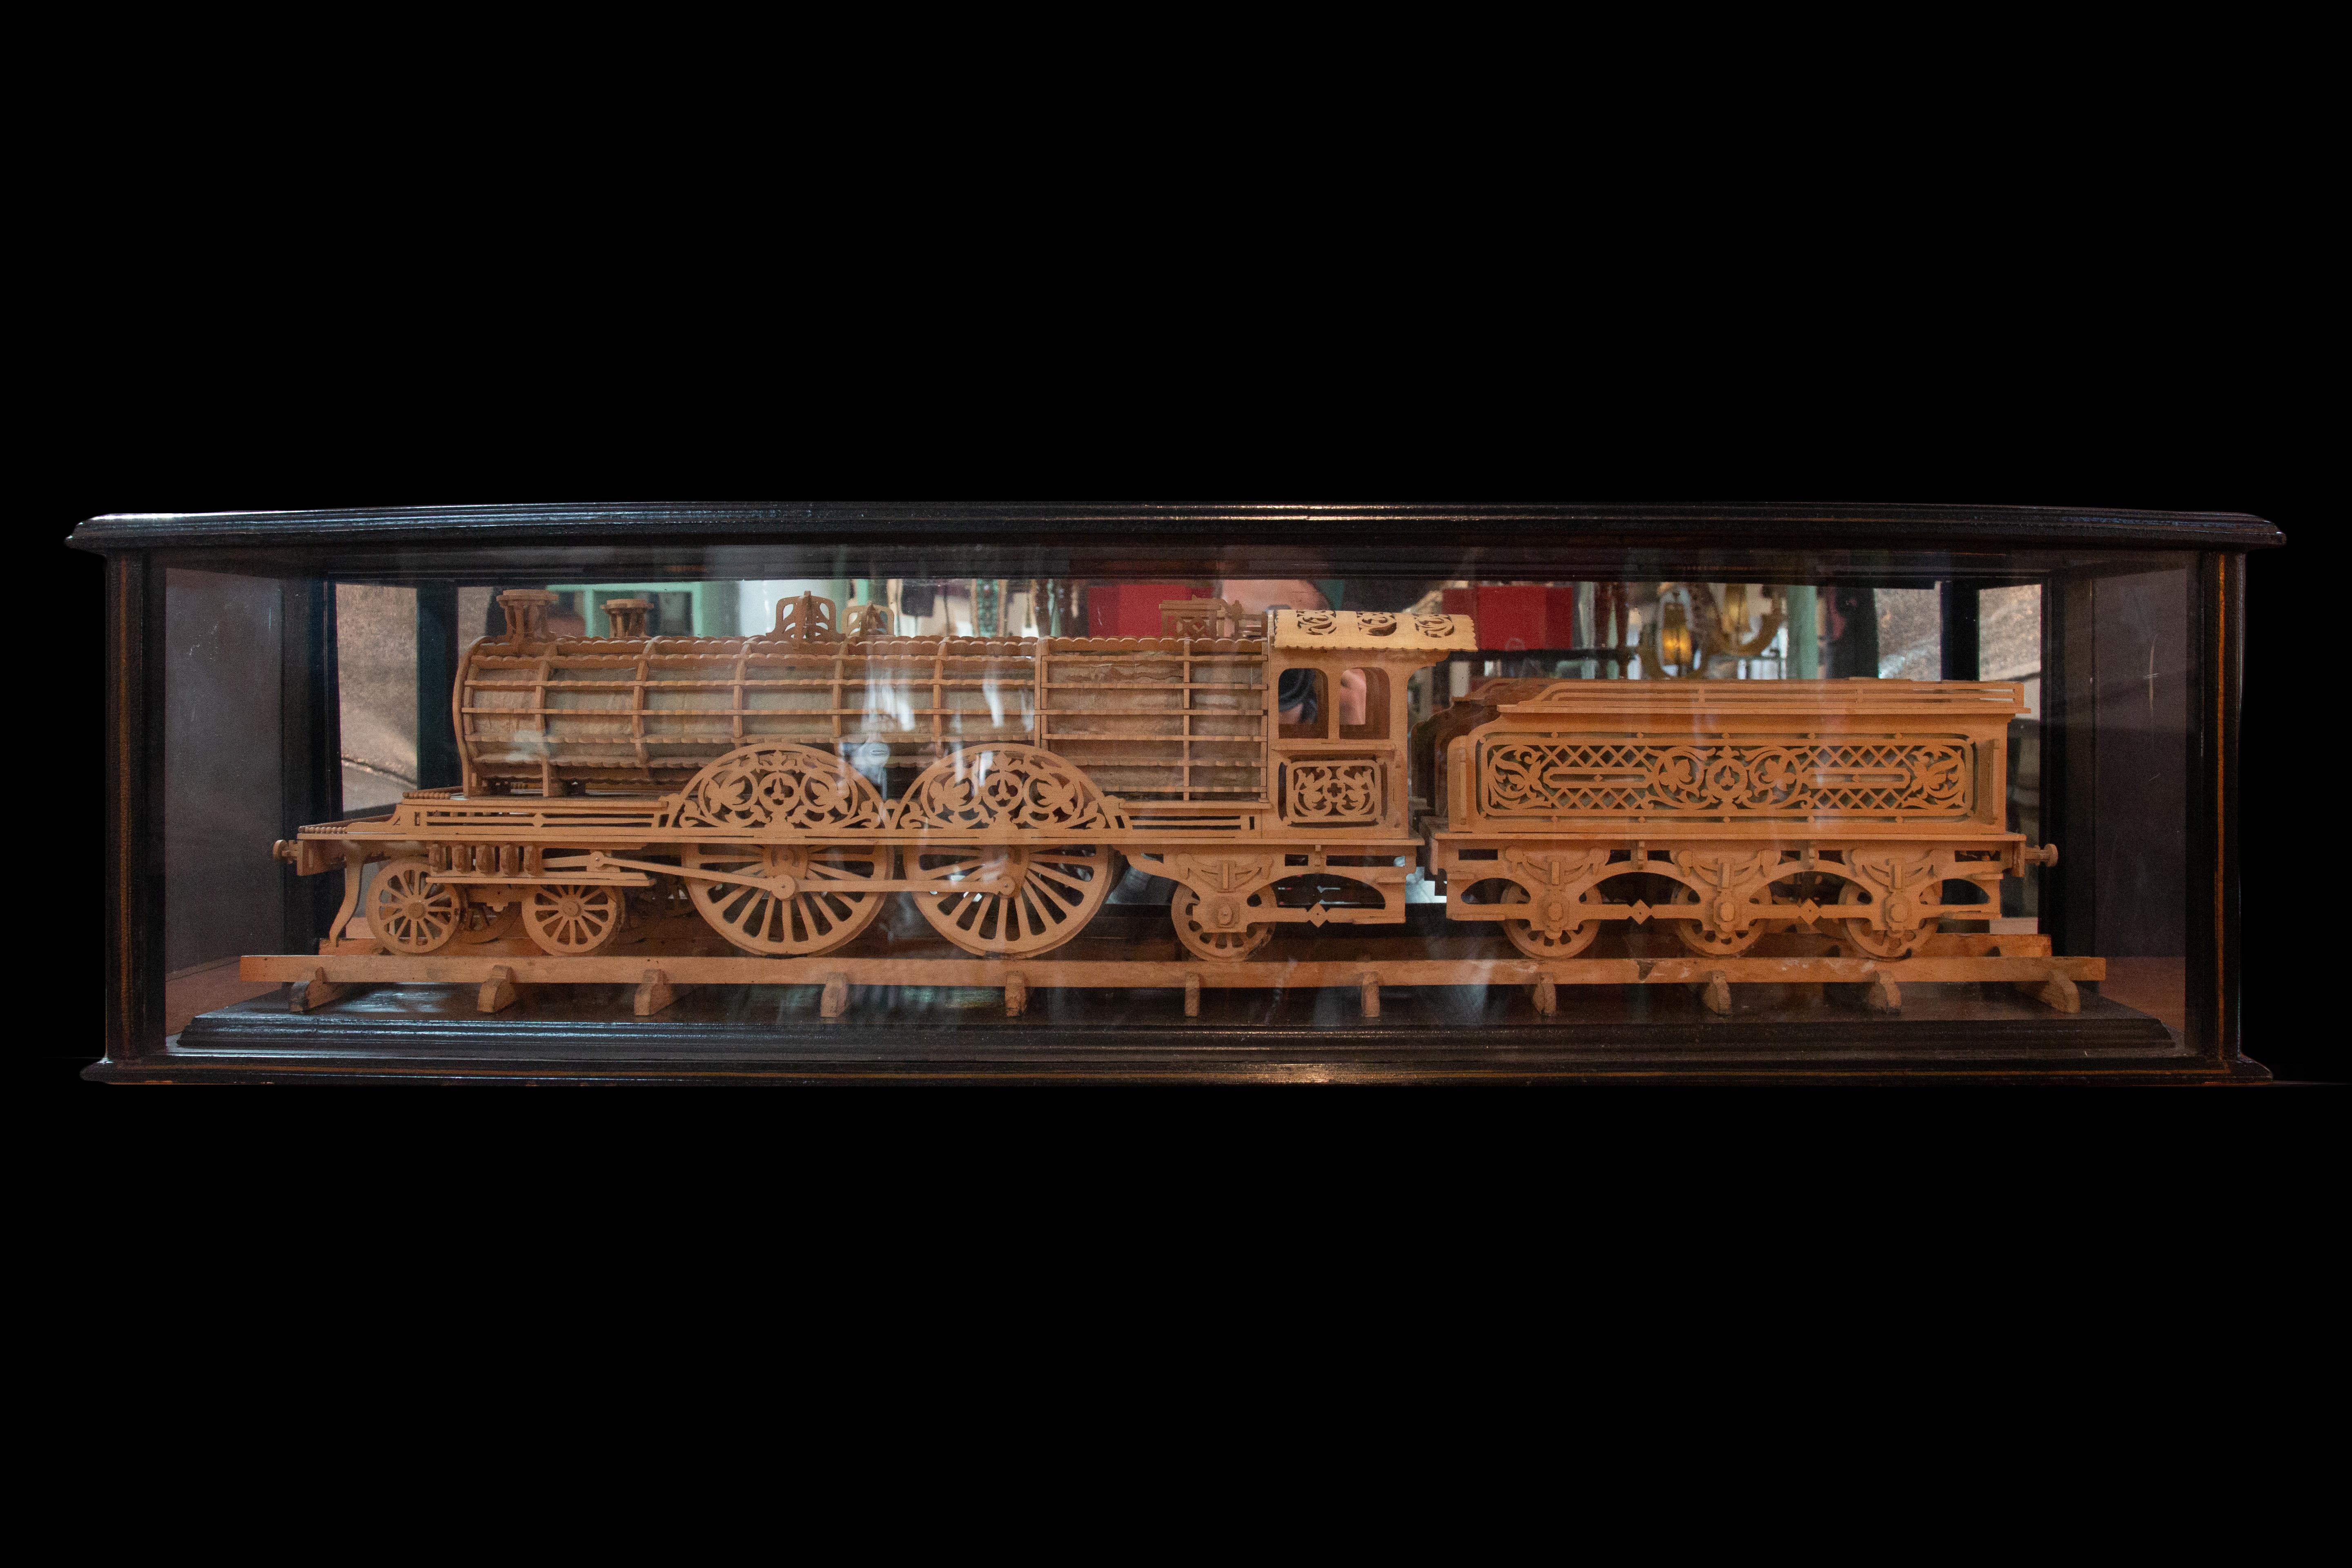 Carved Wood Model of a Locomotive showcased in a glazed and painted wood case. This intricately crafted piece captures the essence of a locomotive with stunning attention to detail. The model measures an impressive 42 1/2 inches in length, making it